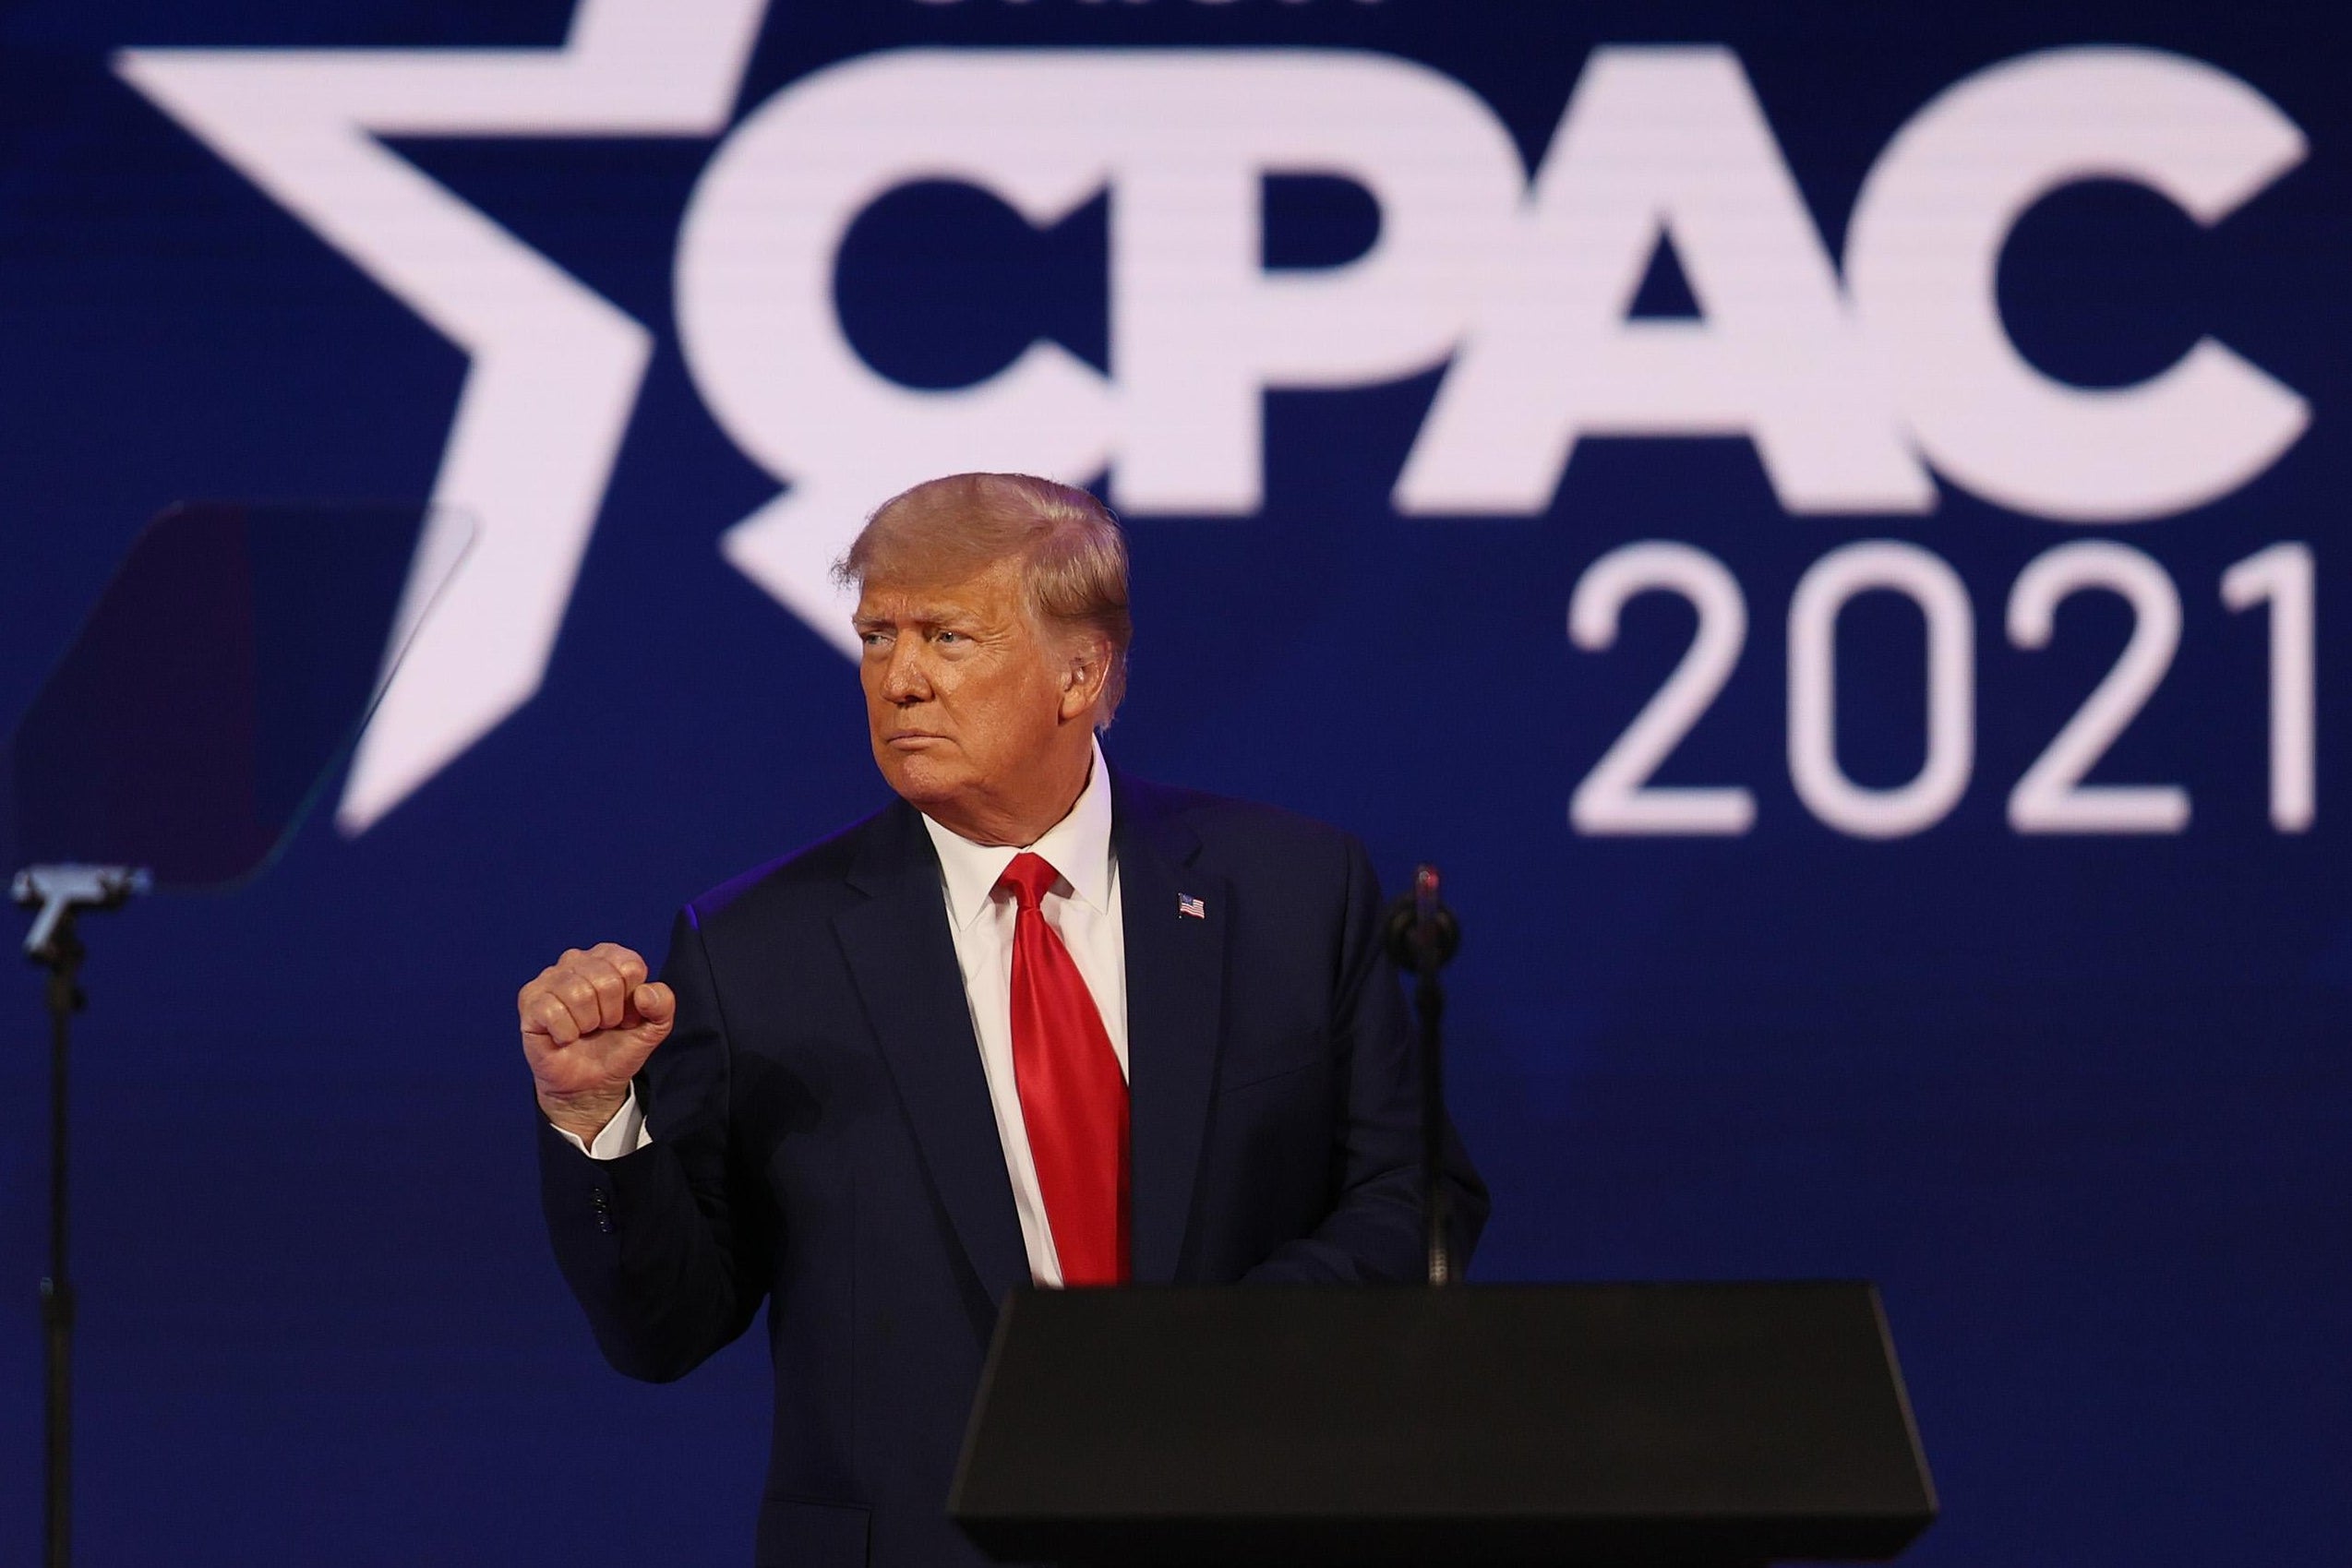 Trump pumping his fist onstage with the CPAC 2021 logo behind him